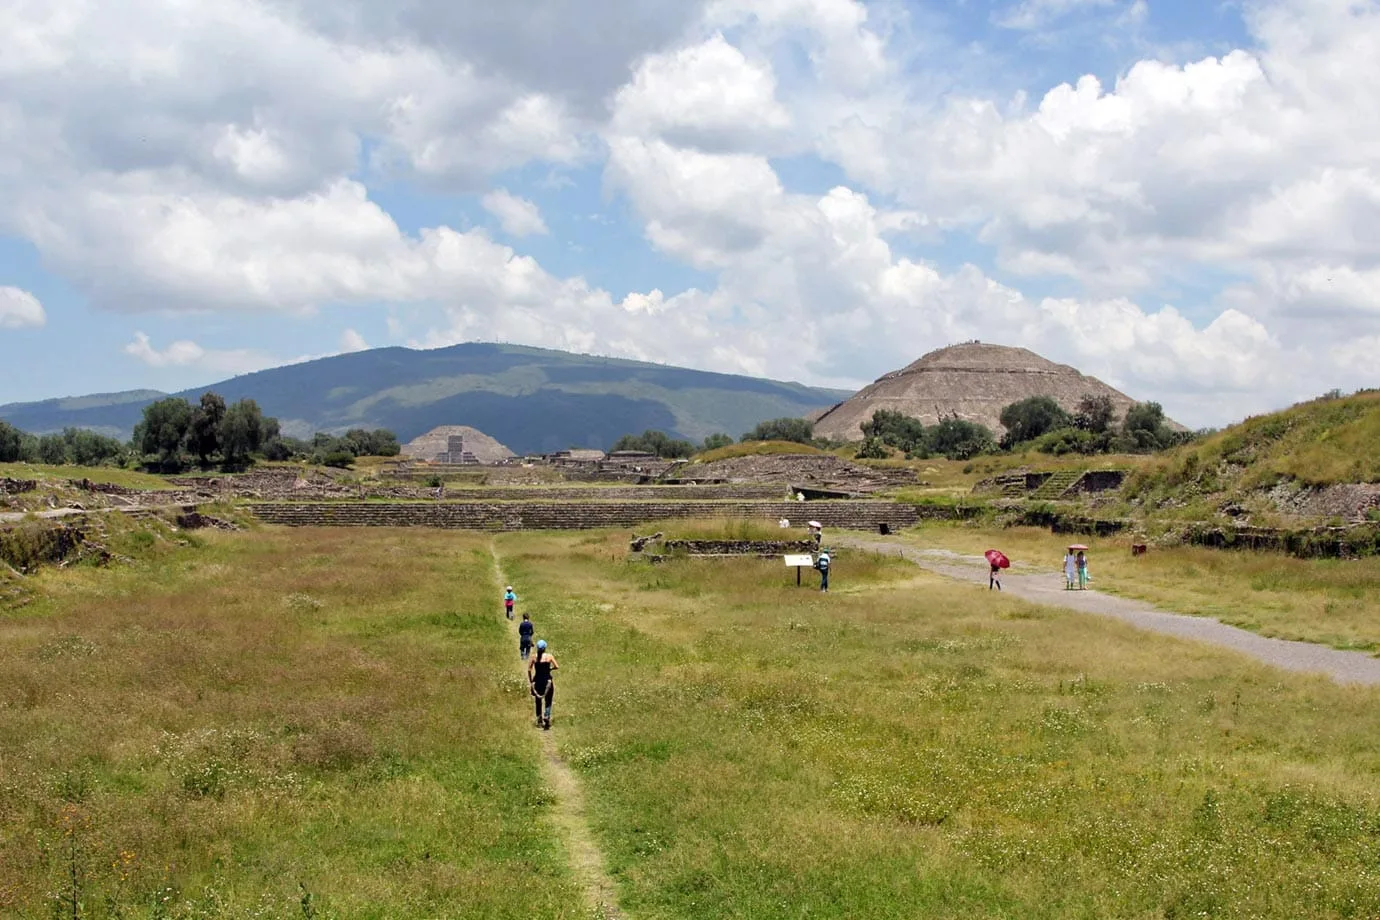 The Pyramids of Teotihuacan are the perfect place to spend a day away from Mexico City